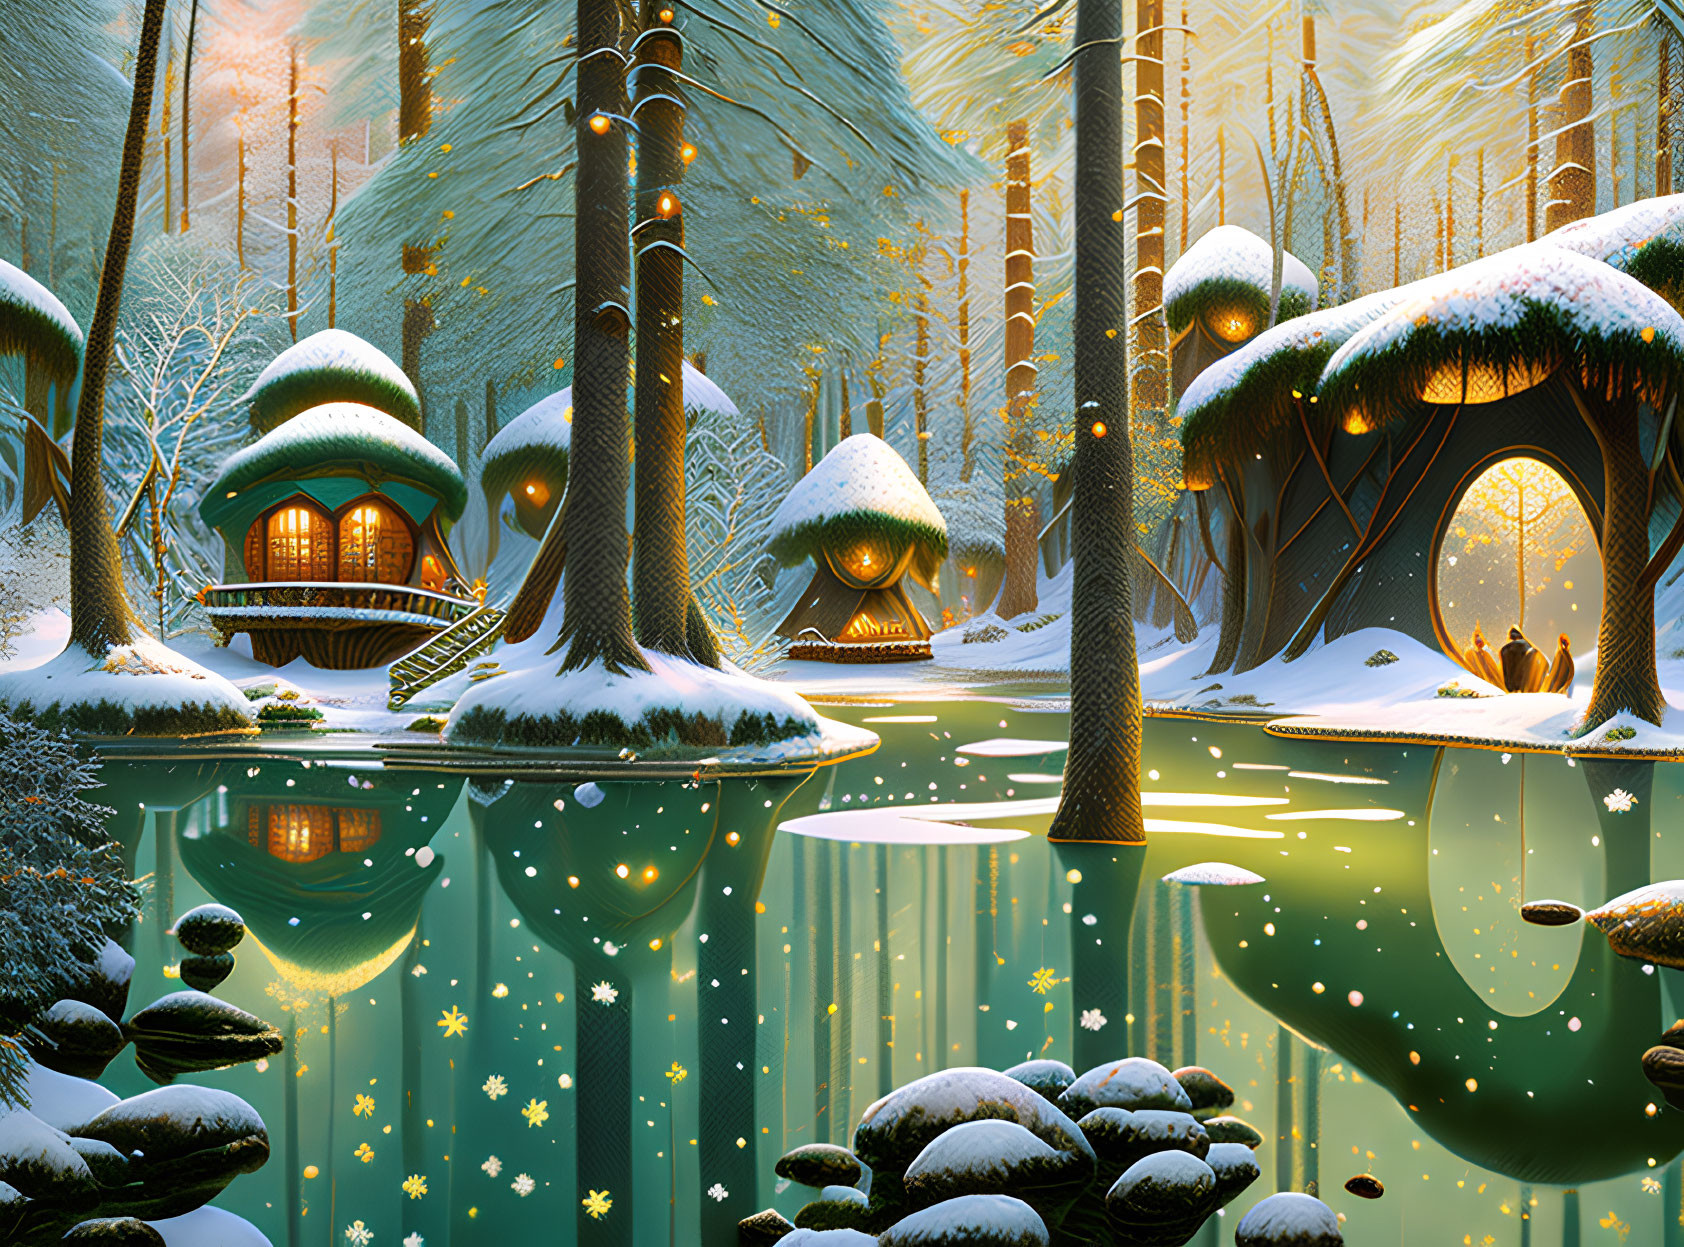 Whimsical mushroom houses in enchanted winter forest